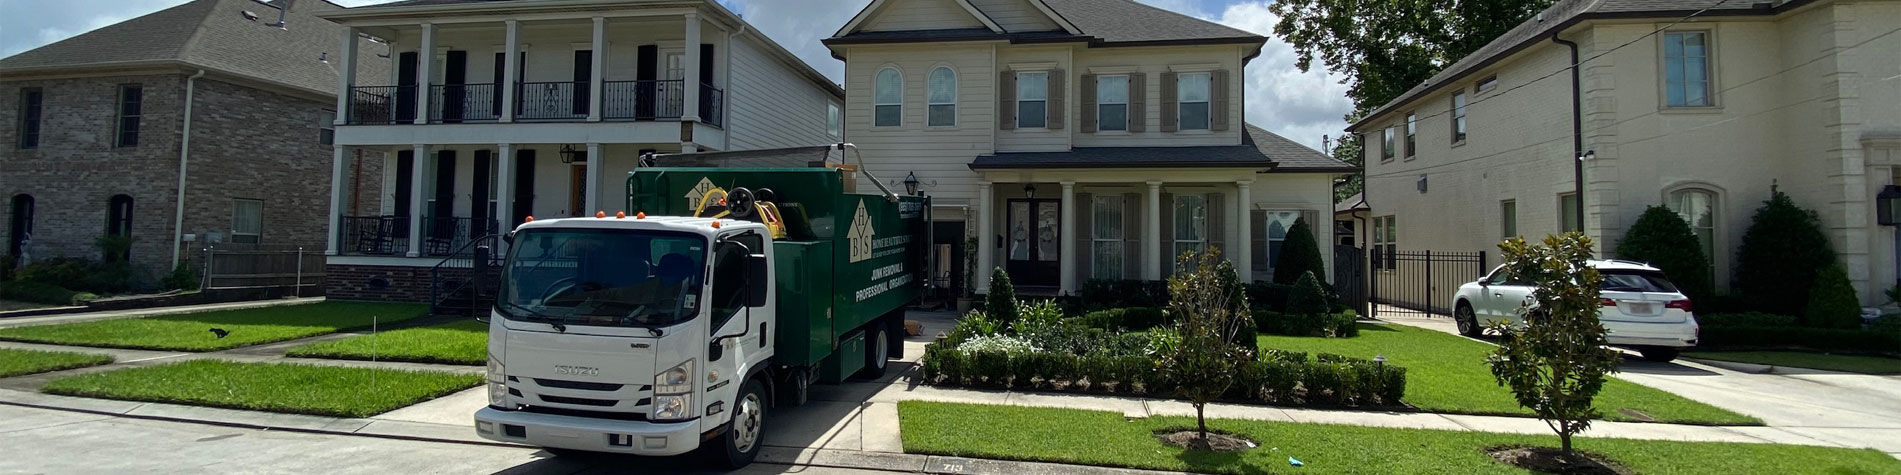 Junk Removal Truck in a Mandeville Neighborhood Completing Junk Removal Work